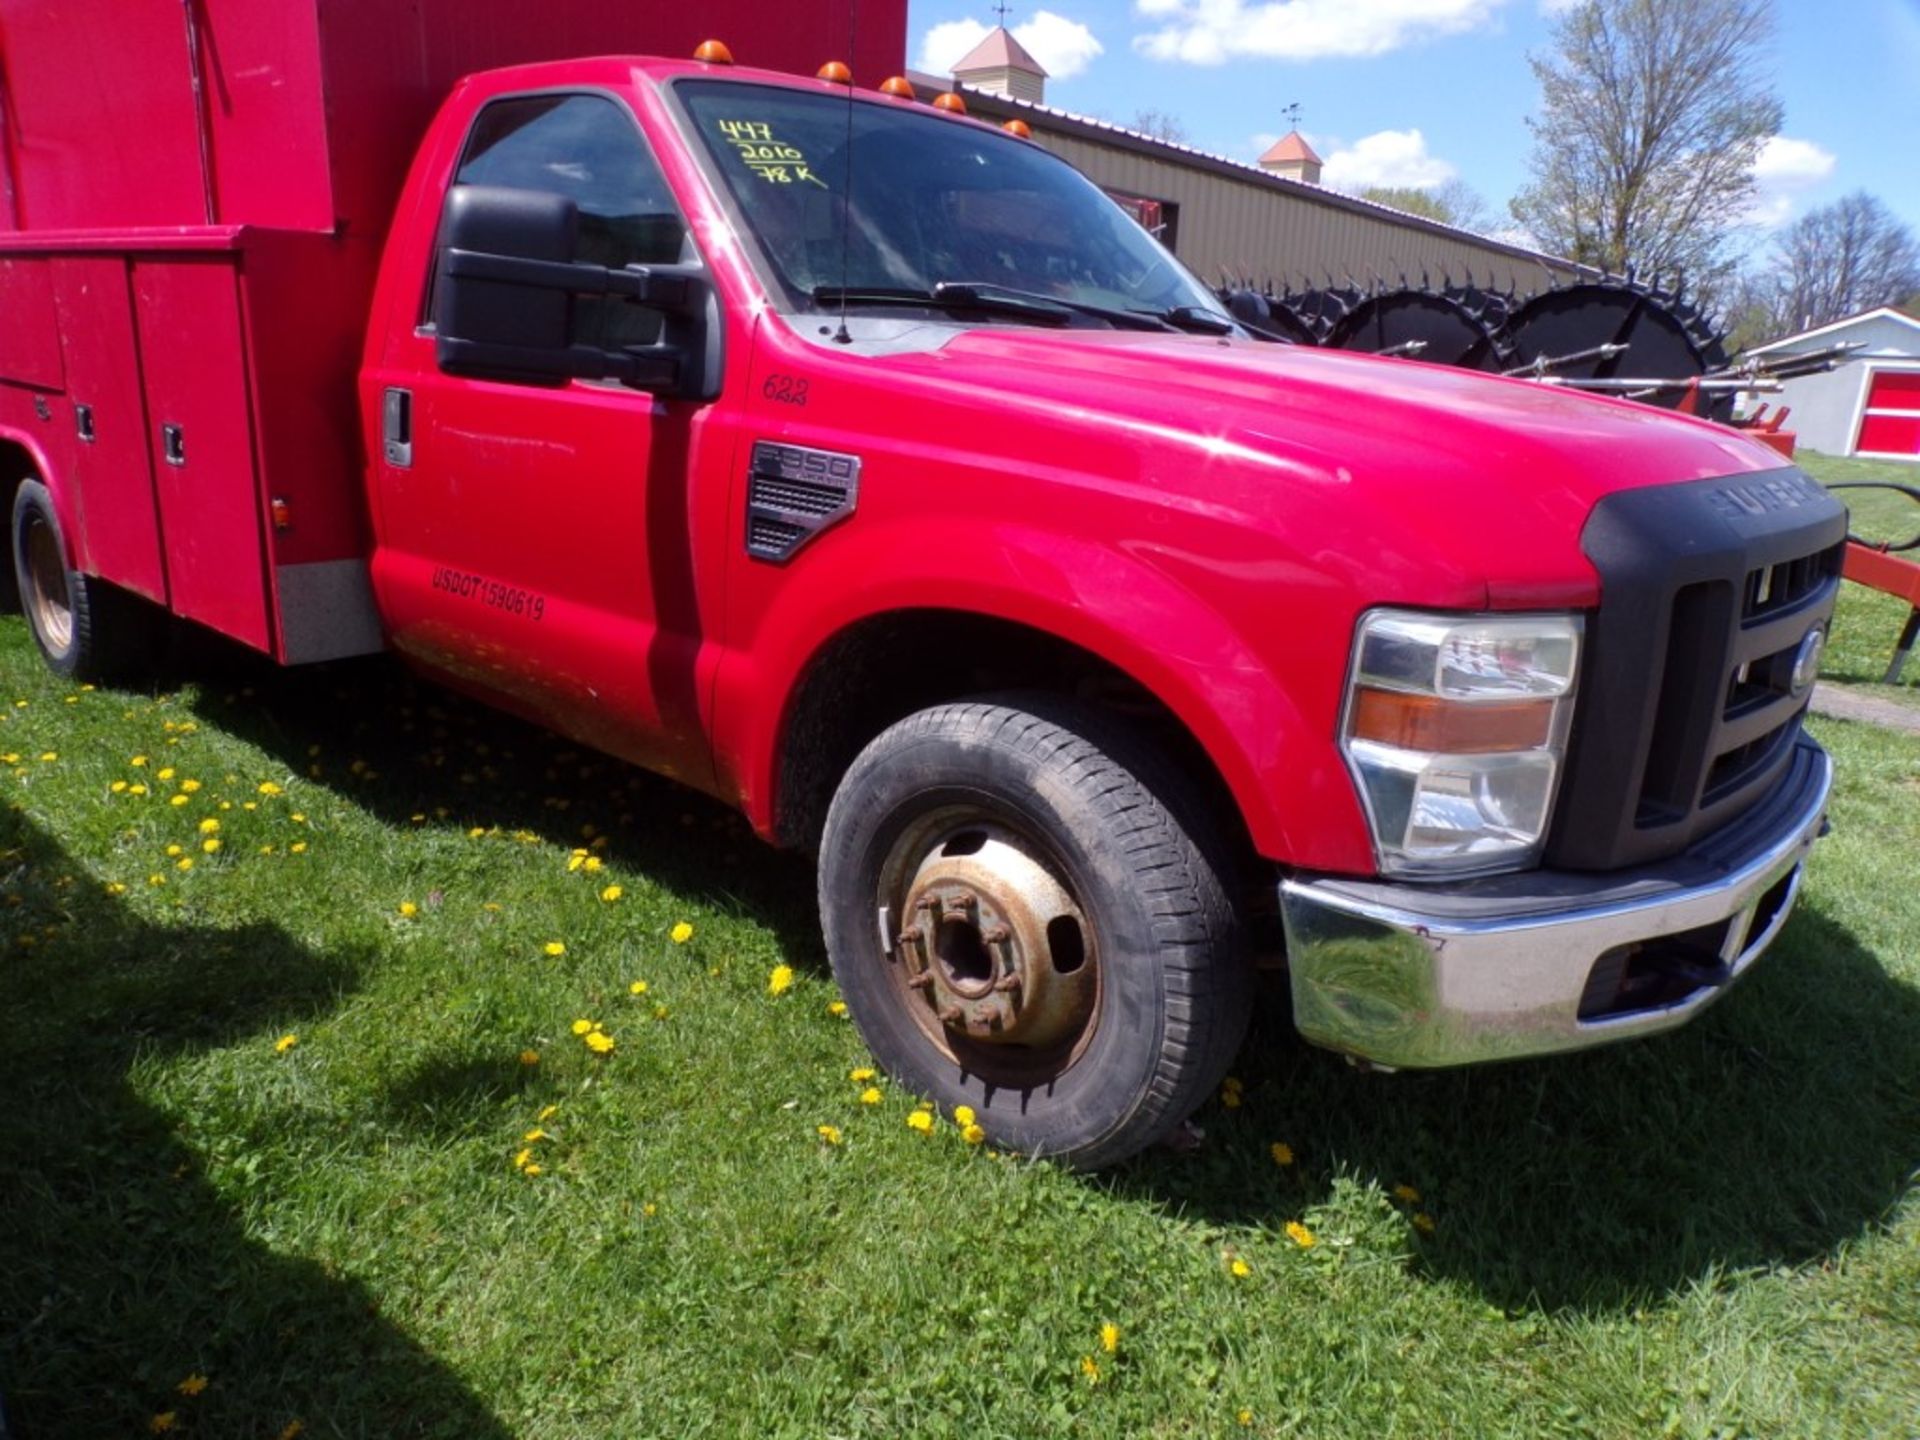 2010 Ford F-350 XL Regular Cab Utility Truck, Red, Reading Body, 78,858 Miles, Vin.# - Image 5 of 6